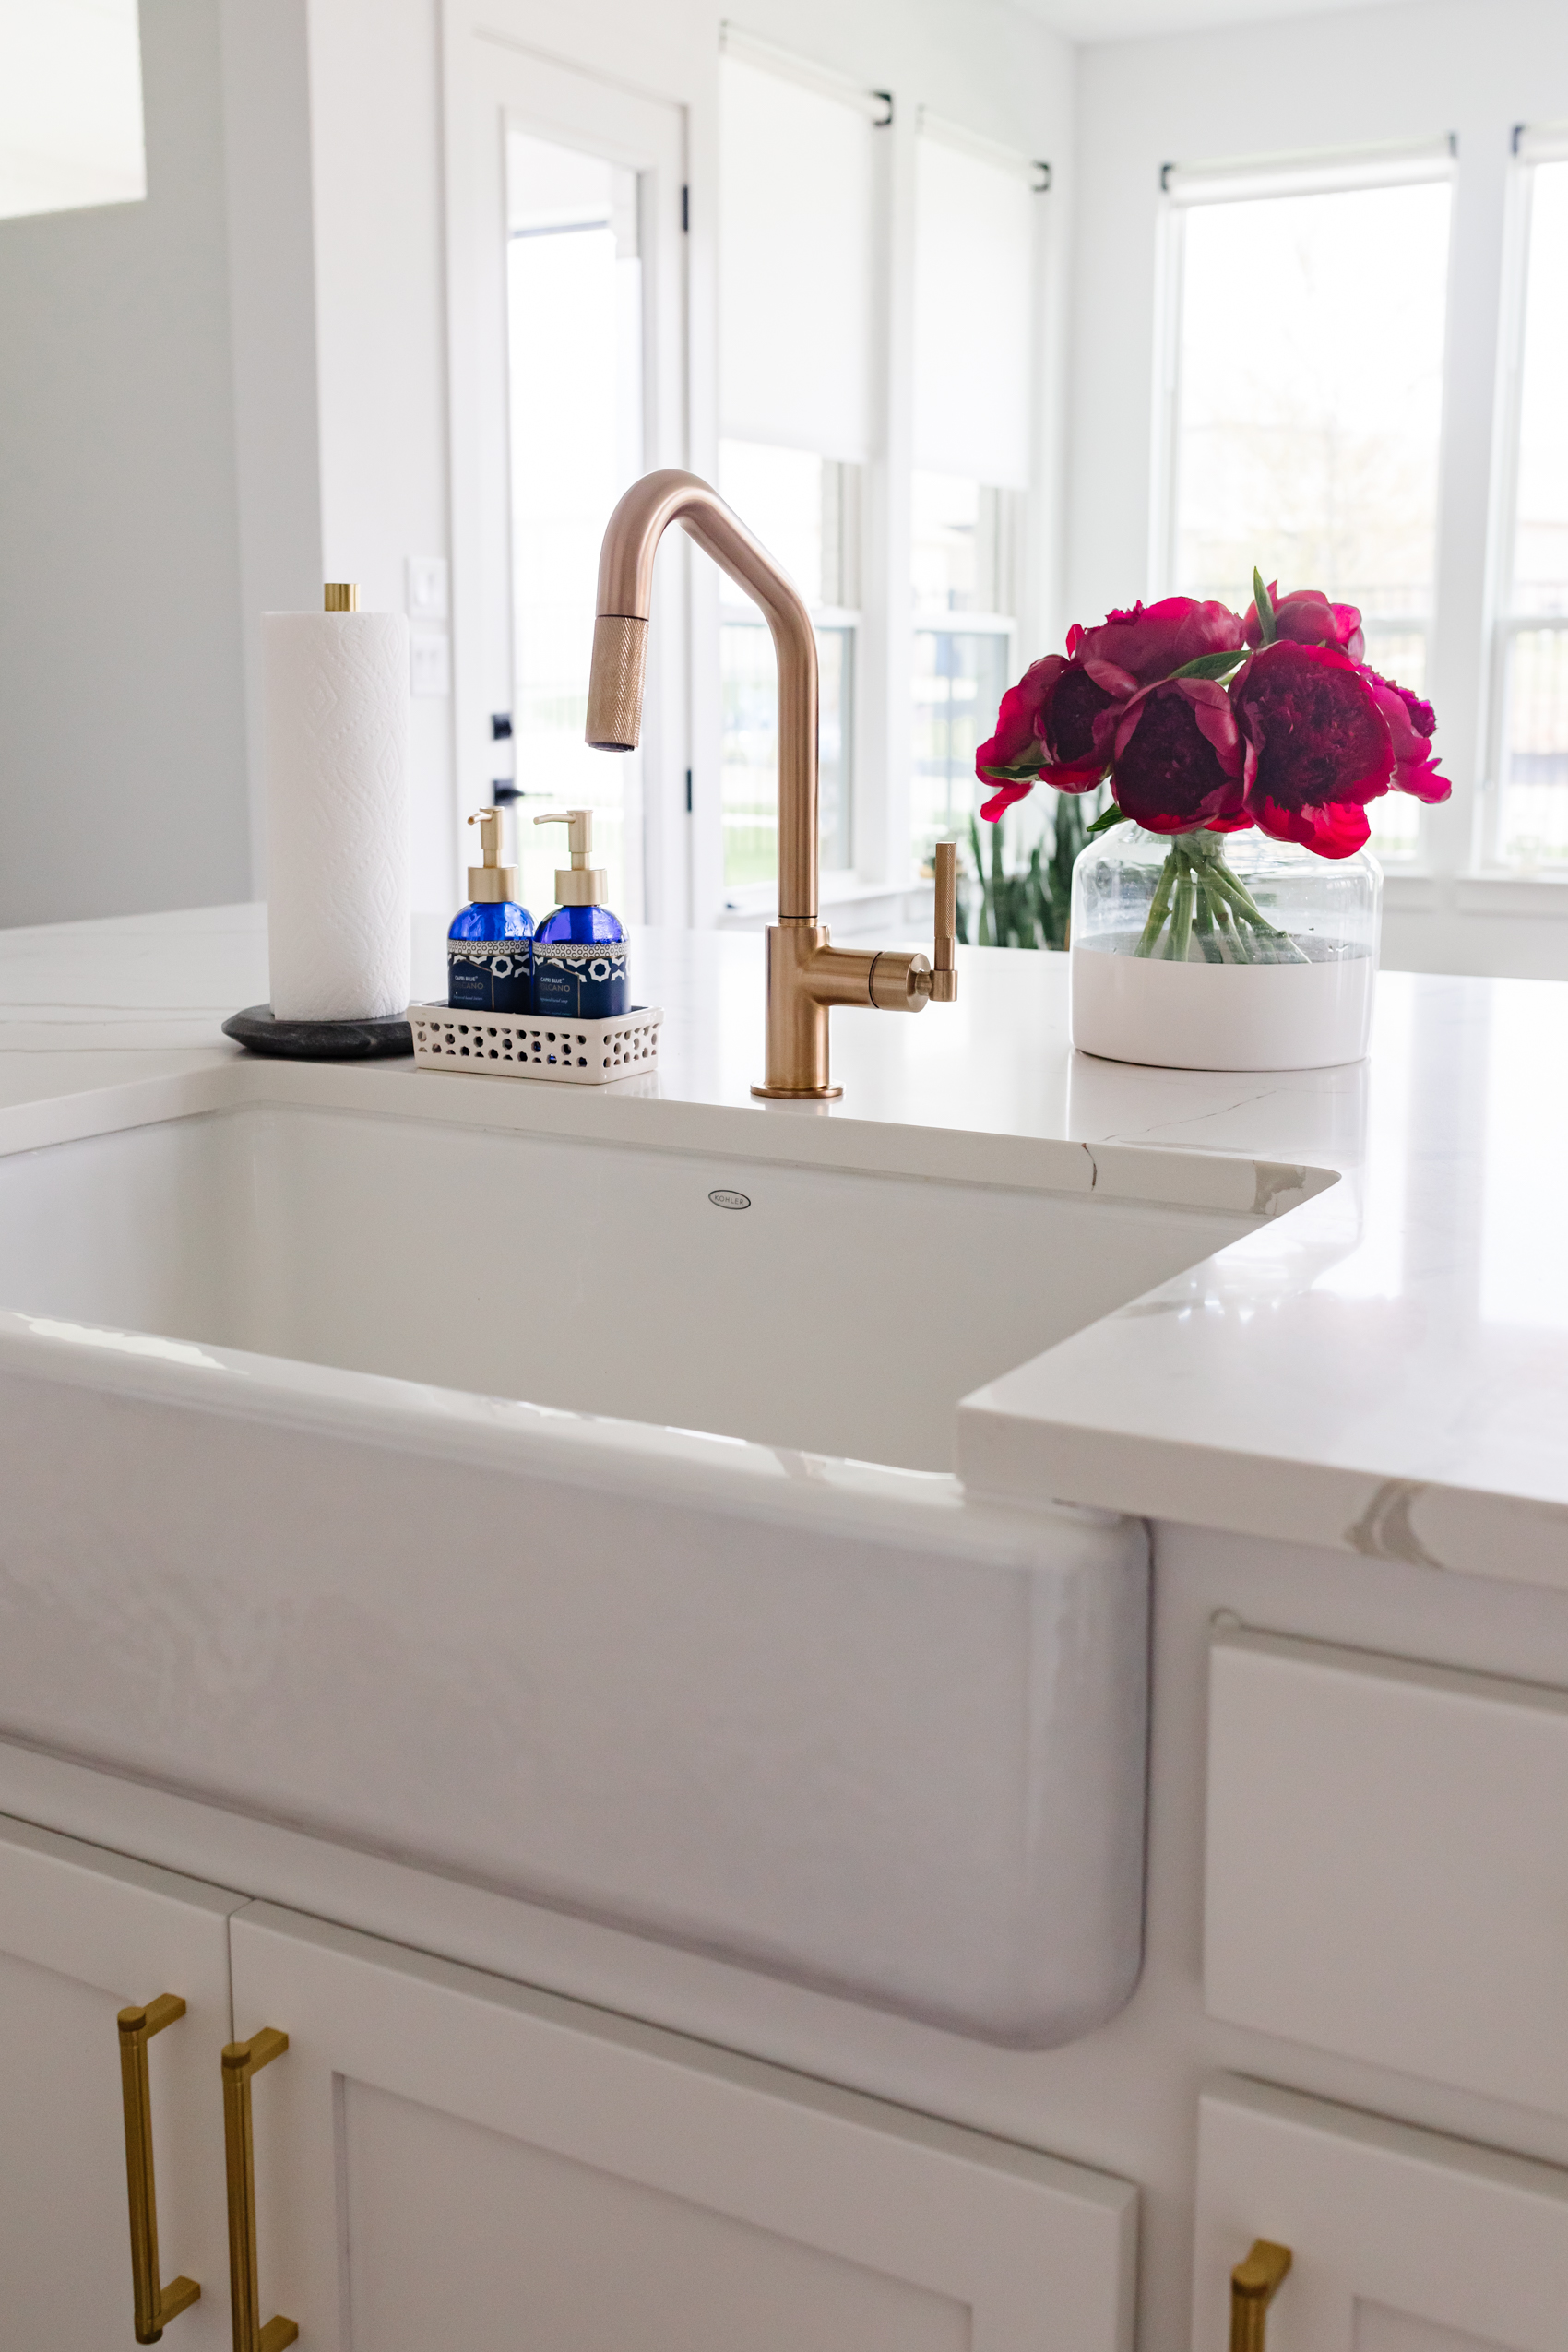 Brizo Litze Angled Pull Down faucet with knurled handle, Kohler Whitehaven farmhouse sink in a transitional kitchen, Serena & Lily poetto vase with red peonies